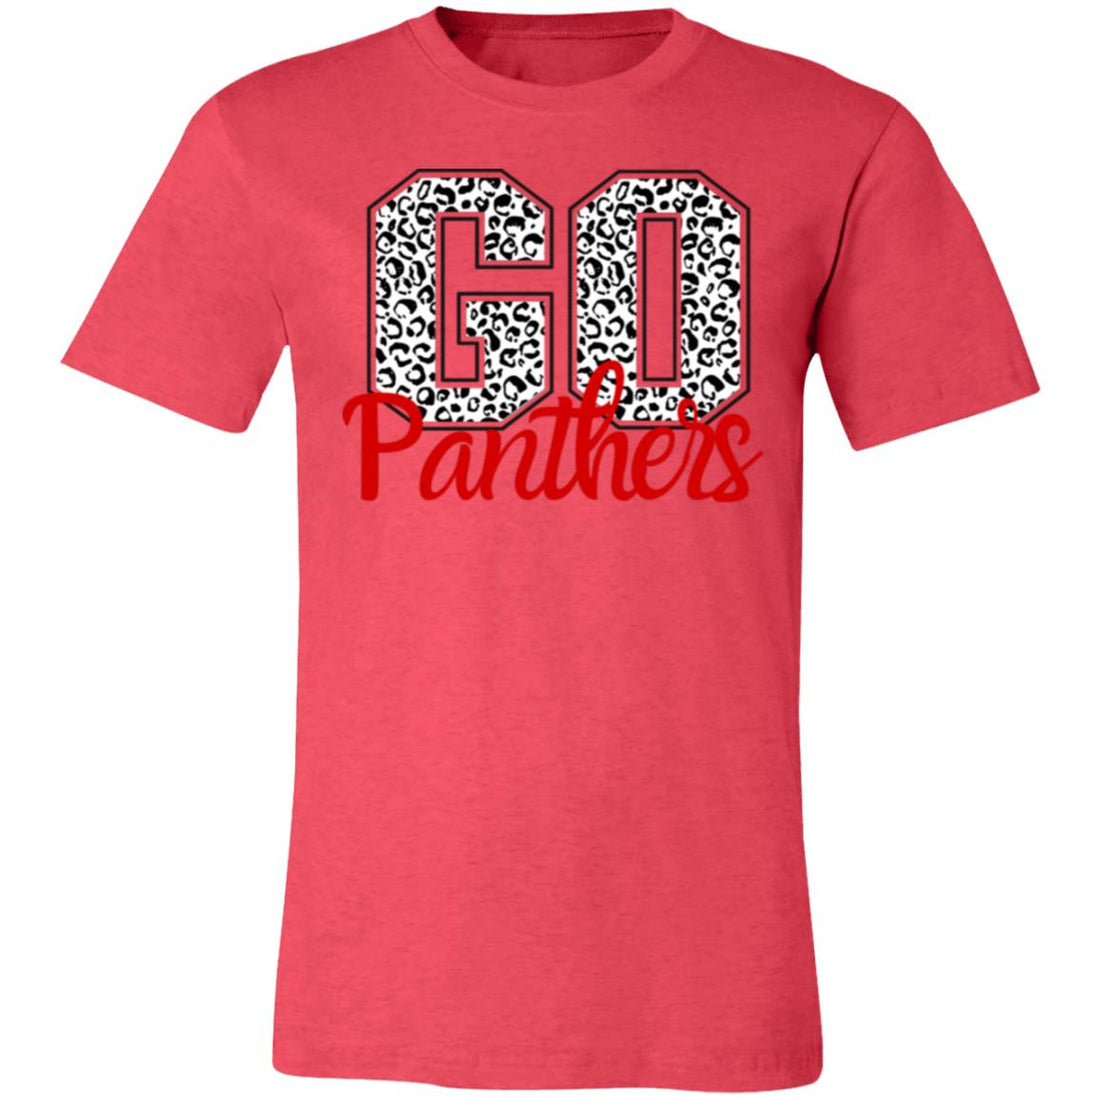 Go Panthers Print T-Shirt - T-Shirts - Positively Sassy - Go Panthers Print T-Shirt